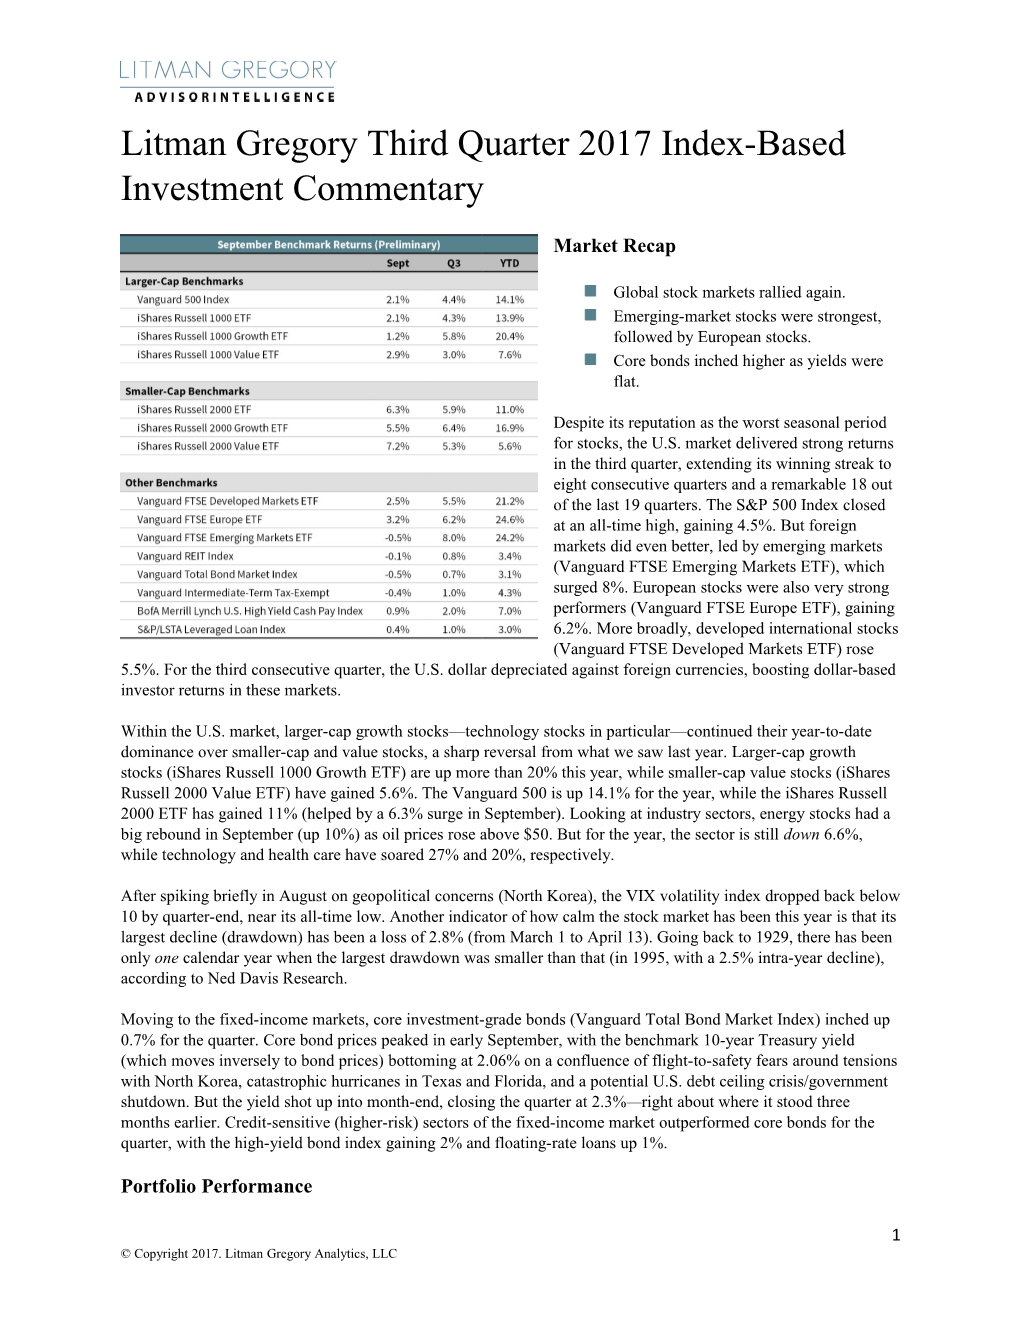 Litman Gregory Third Quarter 2017 Index-Based Investment Commentary